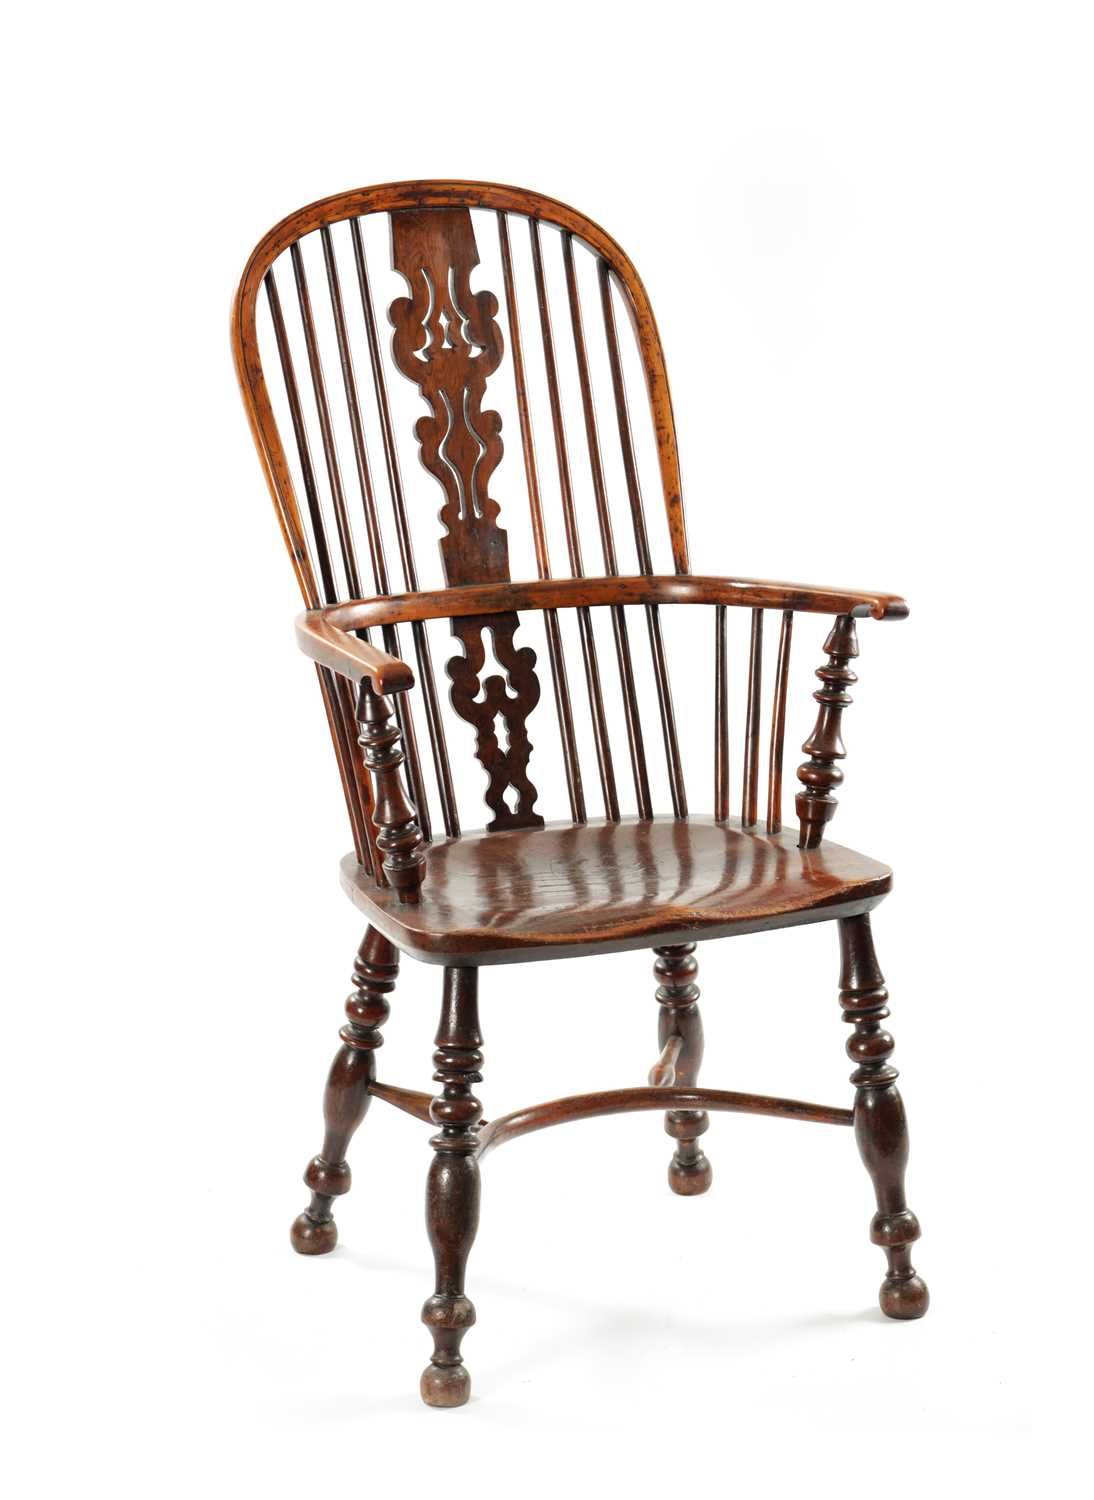 AN EARLY 19TH CENTURY NOTTINGHAMSHIRE YEW-WOOD HIGH BACK WINDSOR CHAIR 19 世纪早期的诺&hellip;